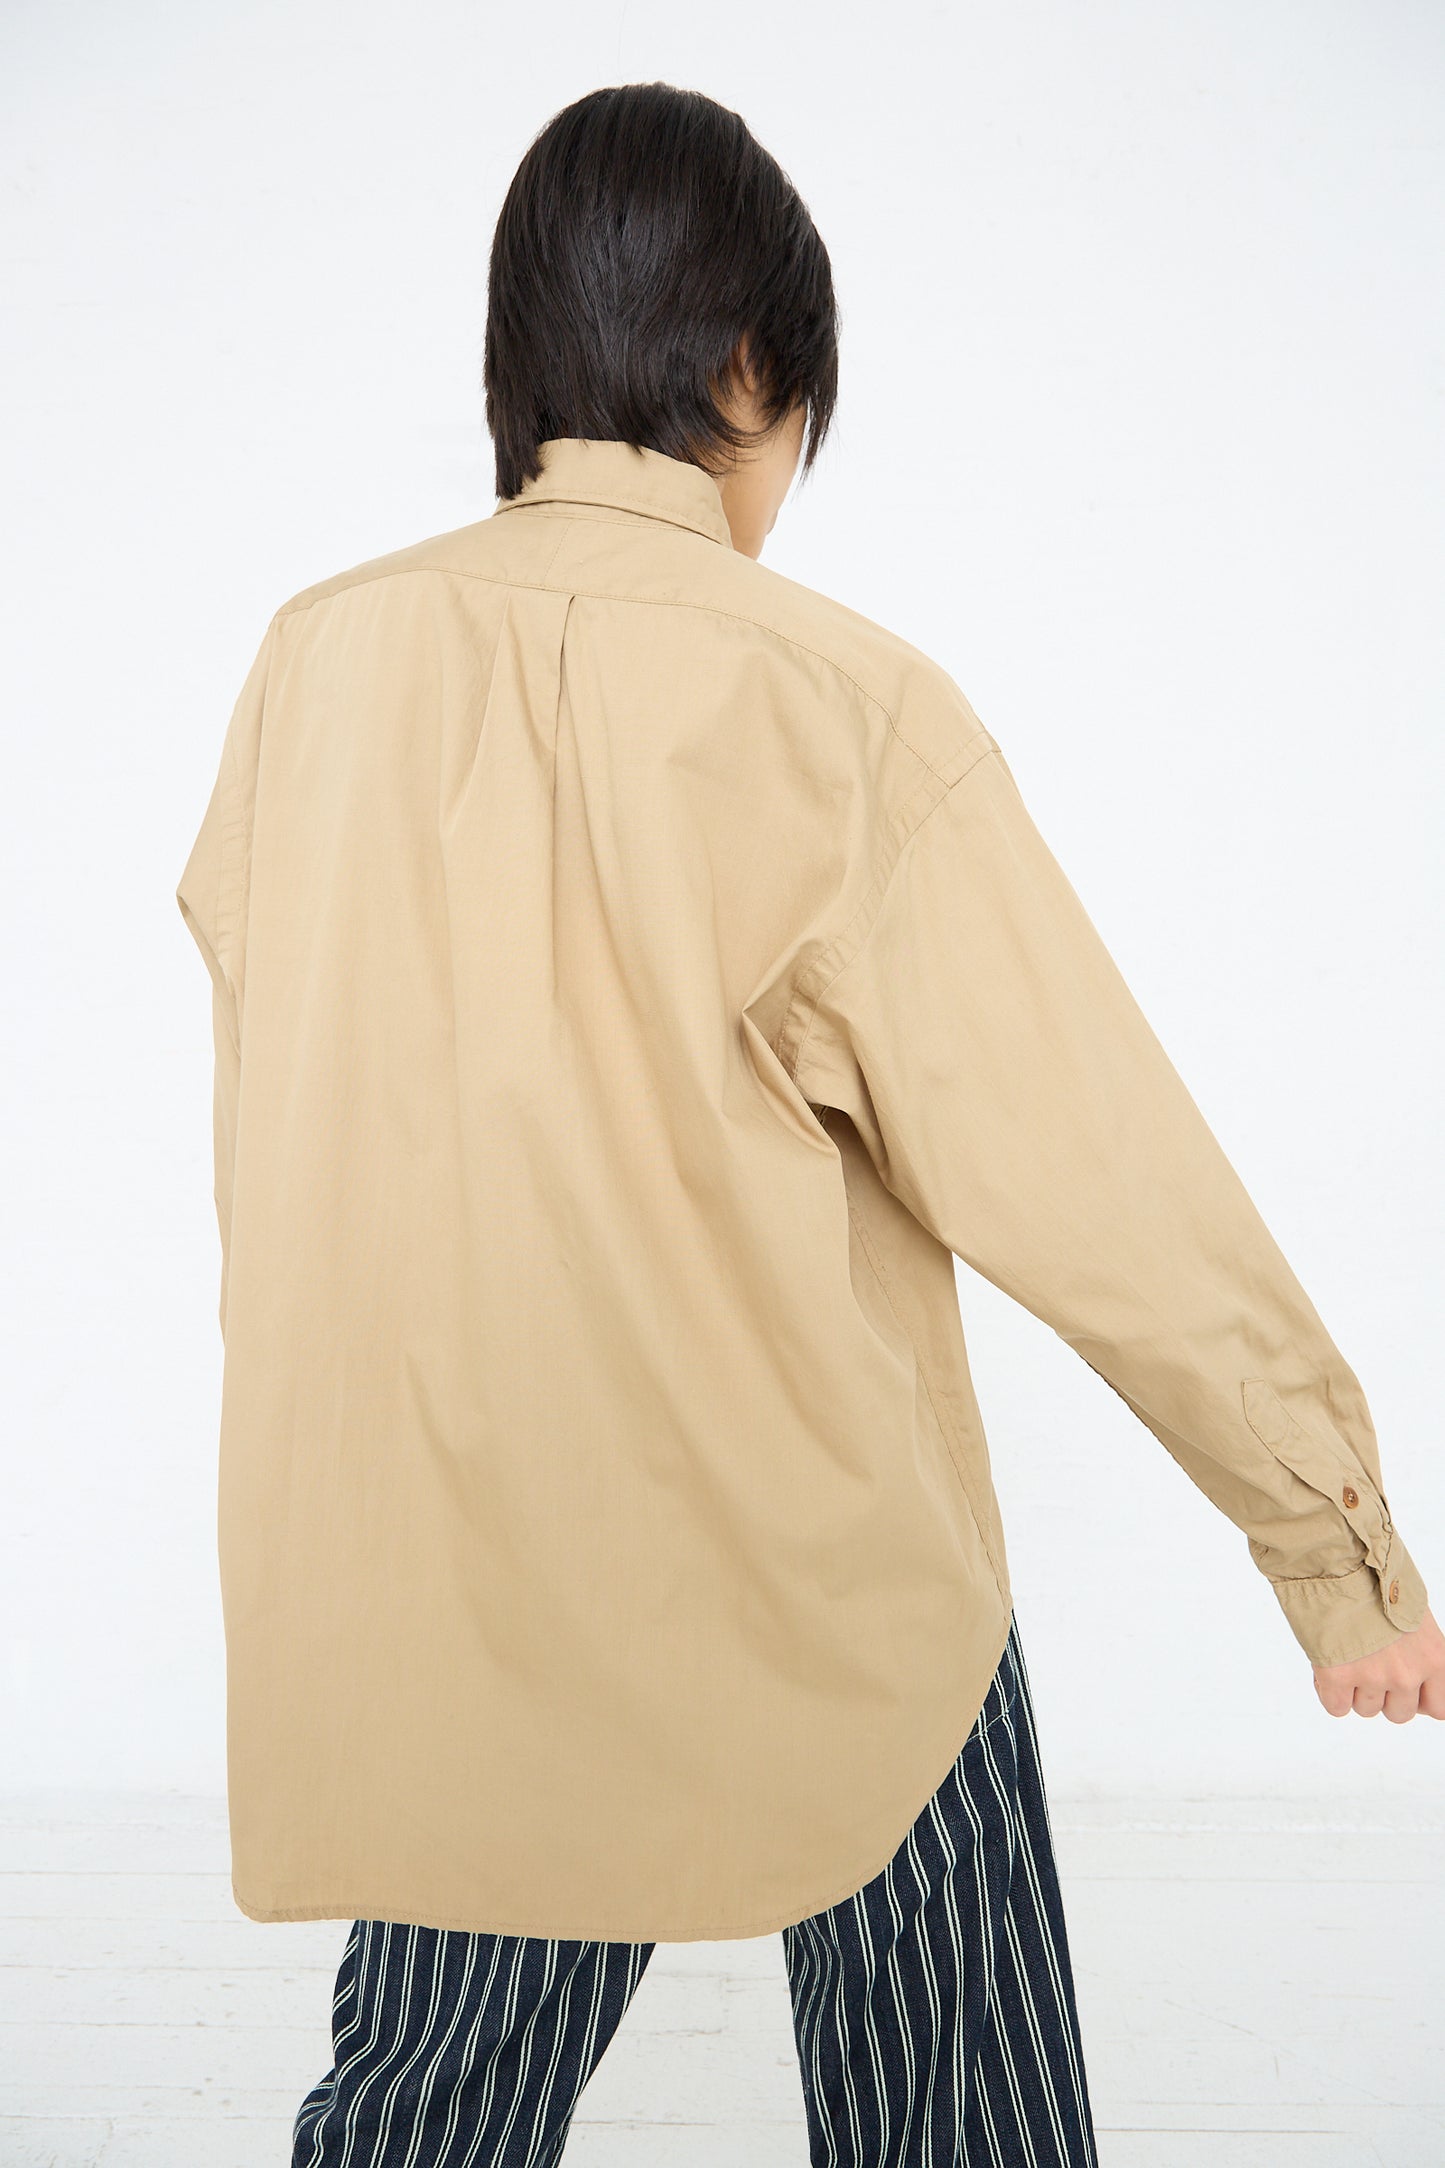 A person seen from the back wearing an oversized As Ever Largo Shirt in 40's Khaki and striped pants against a white background.